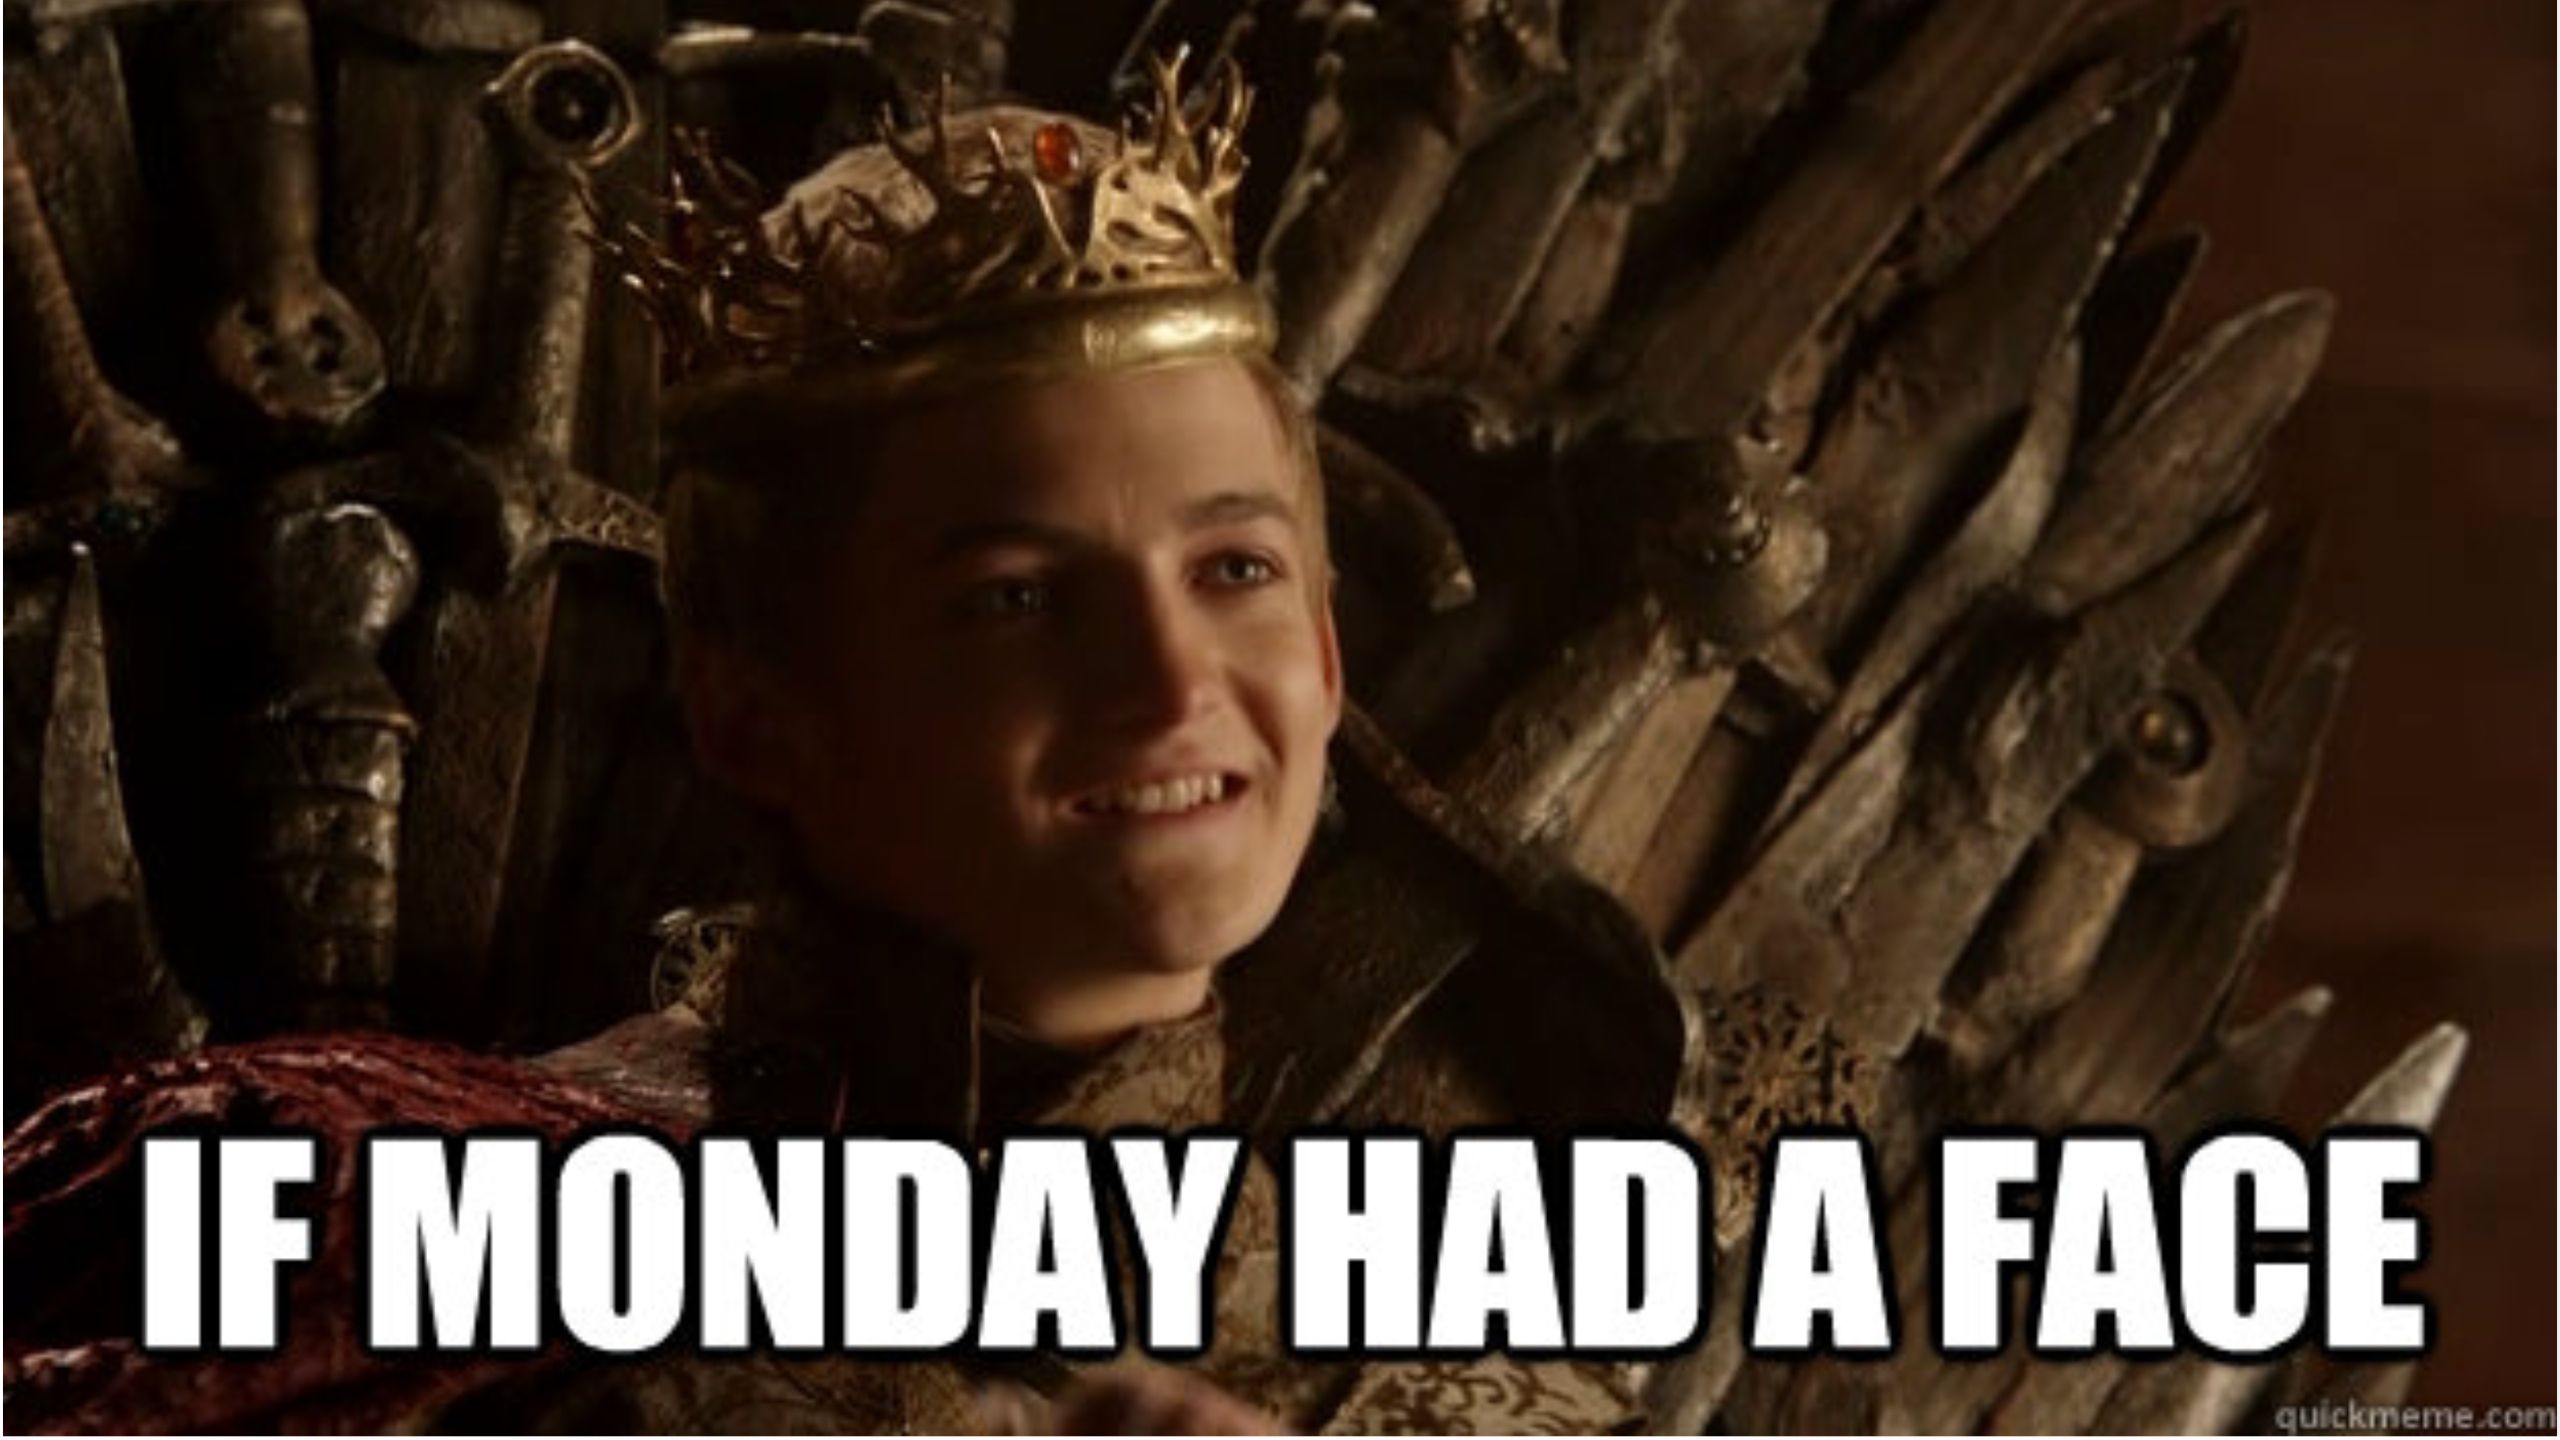 Meme about Joffrey from Game of Thrones. 